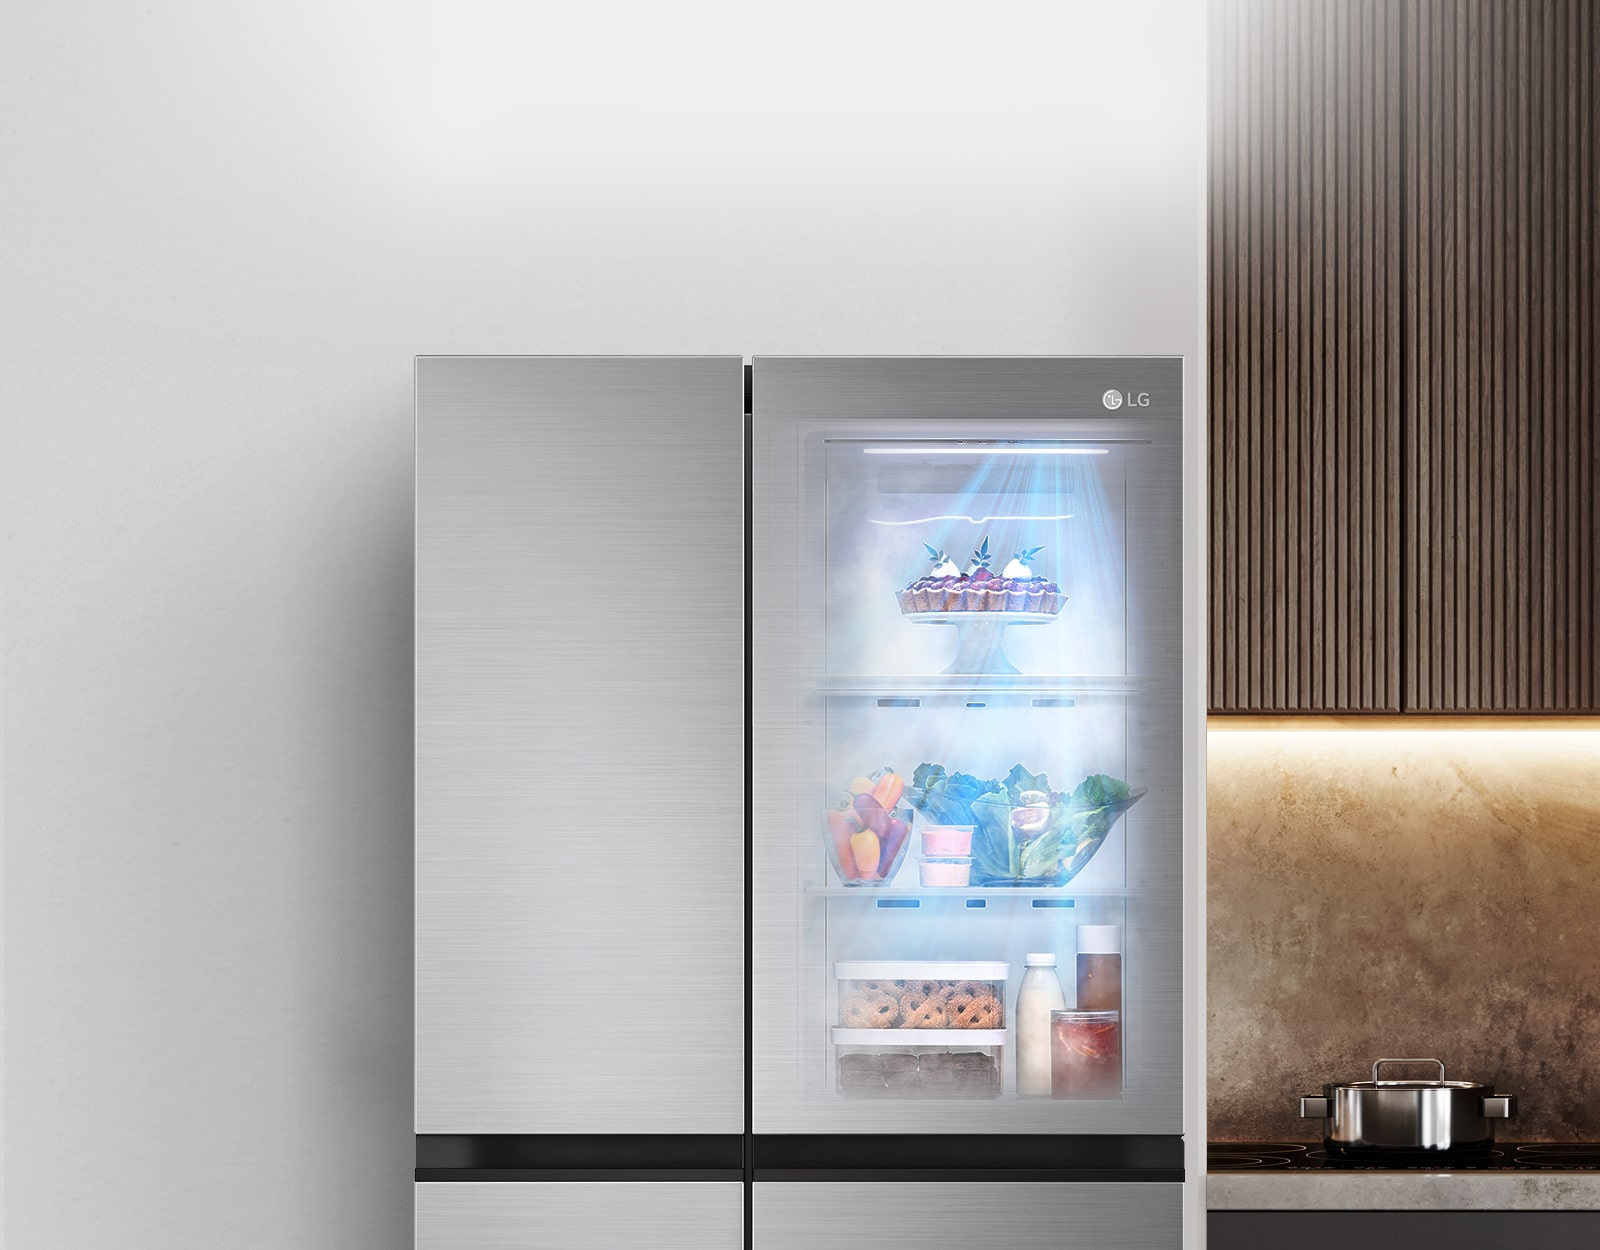 The front view of the InstaView refrigerator is black with lighting inside.  The contents of the fridge can be seen through the InstaView door.  Blue rays of light shine on the contents from the DoorCooling function.